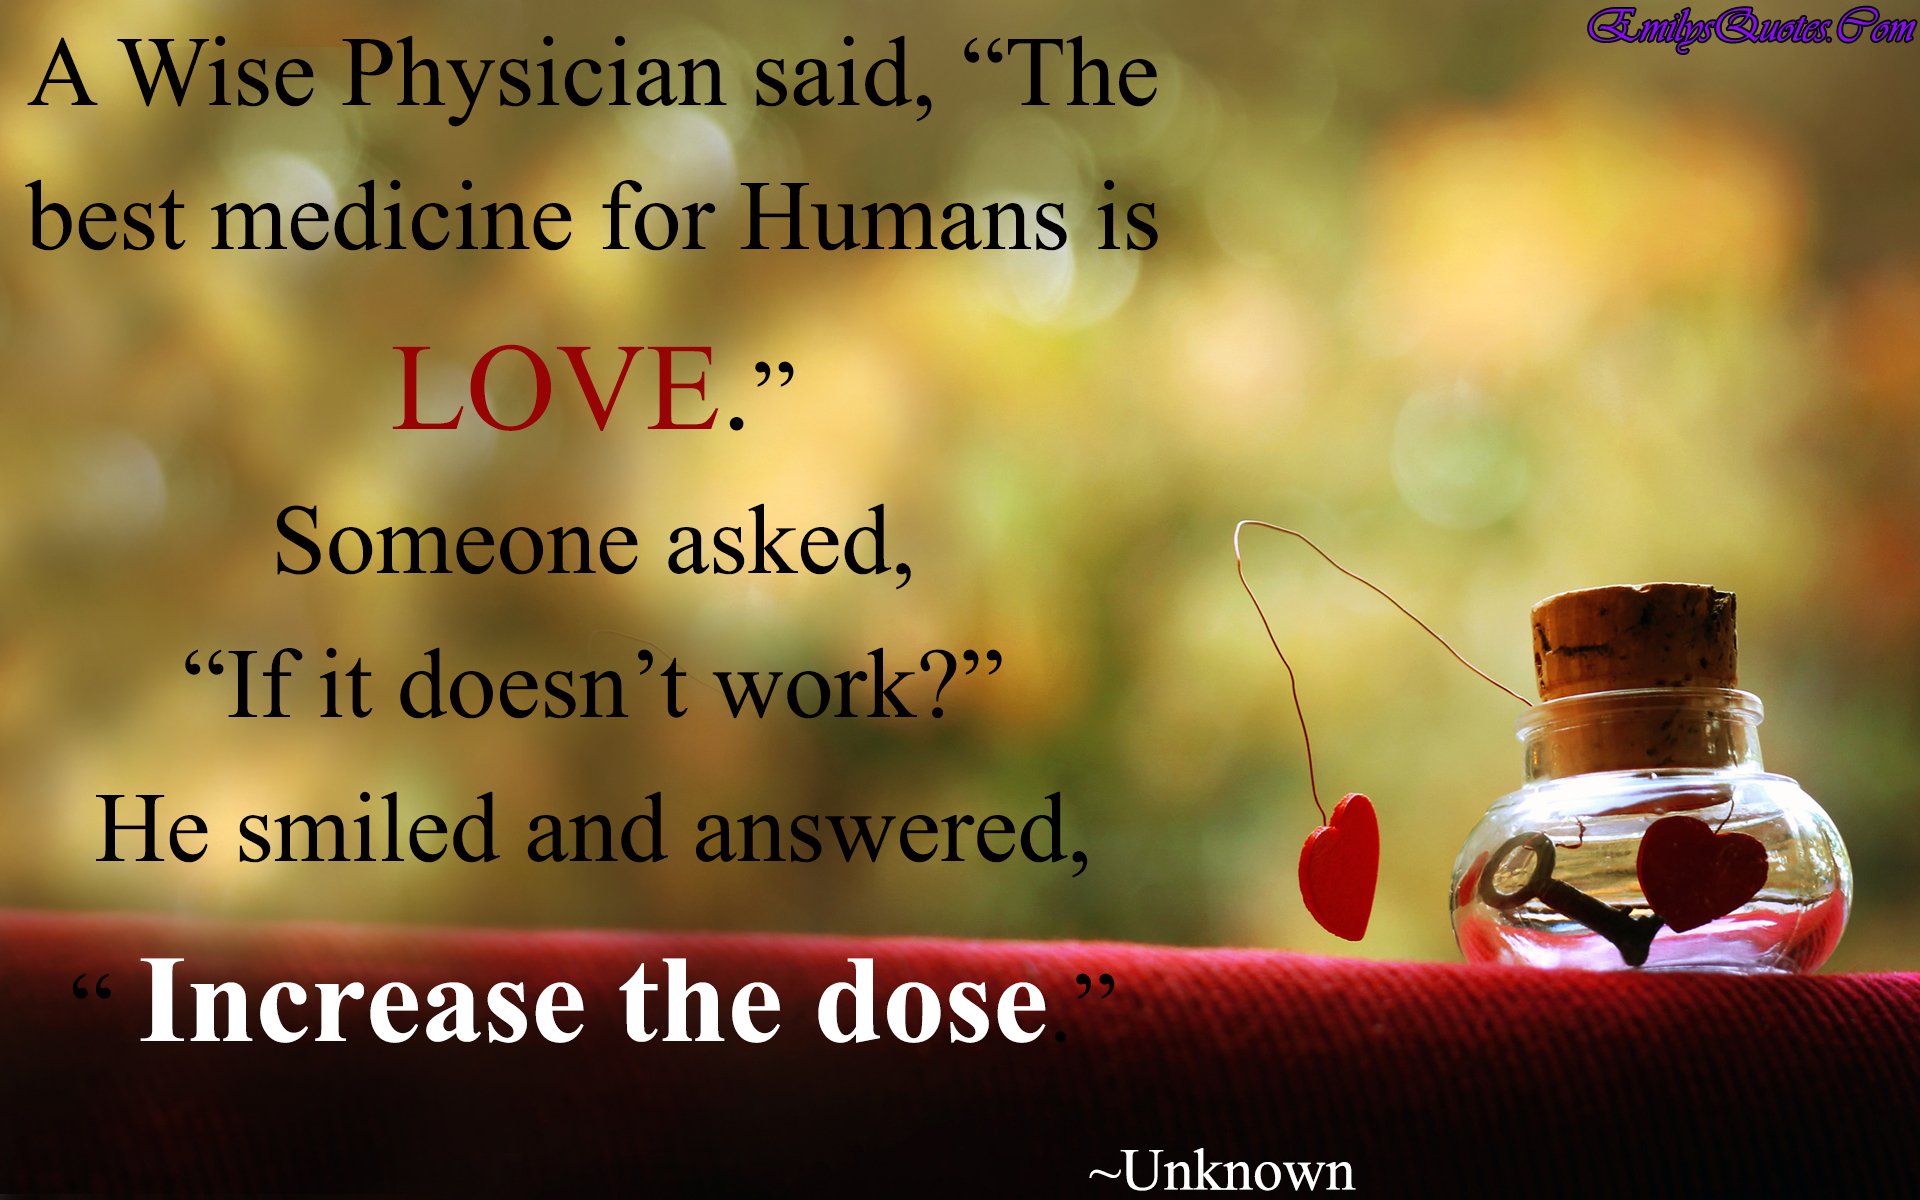 A Wise Physician said, “The best medicine for Humans is LOVE.” Someone